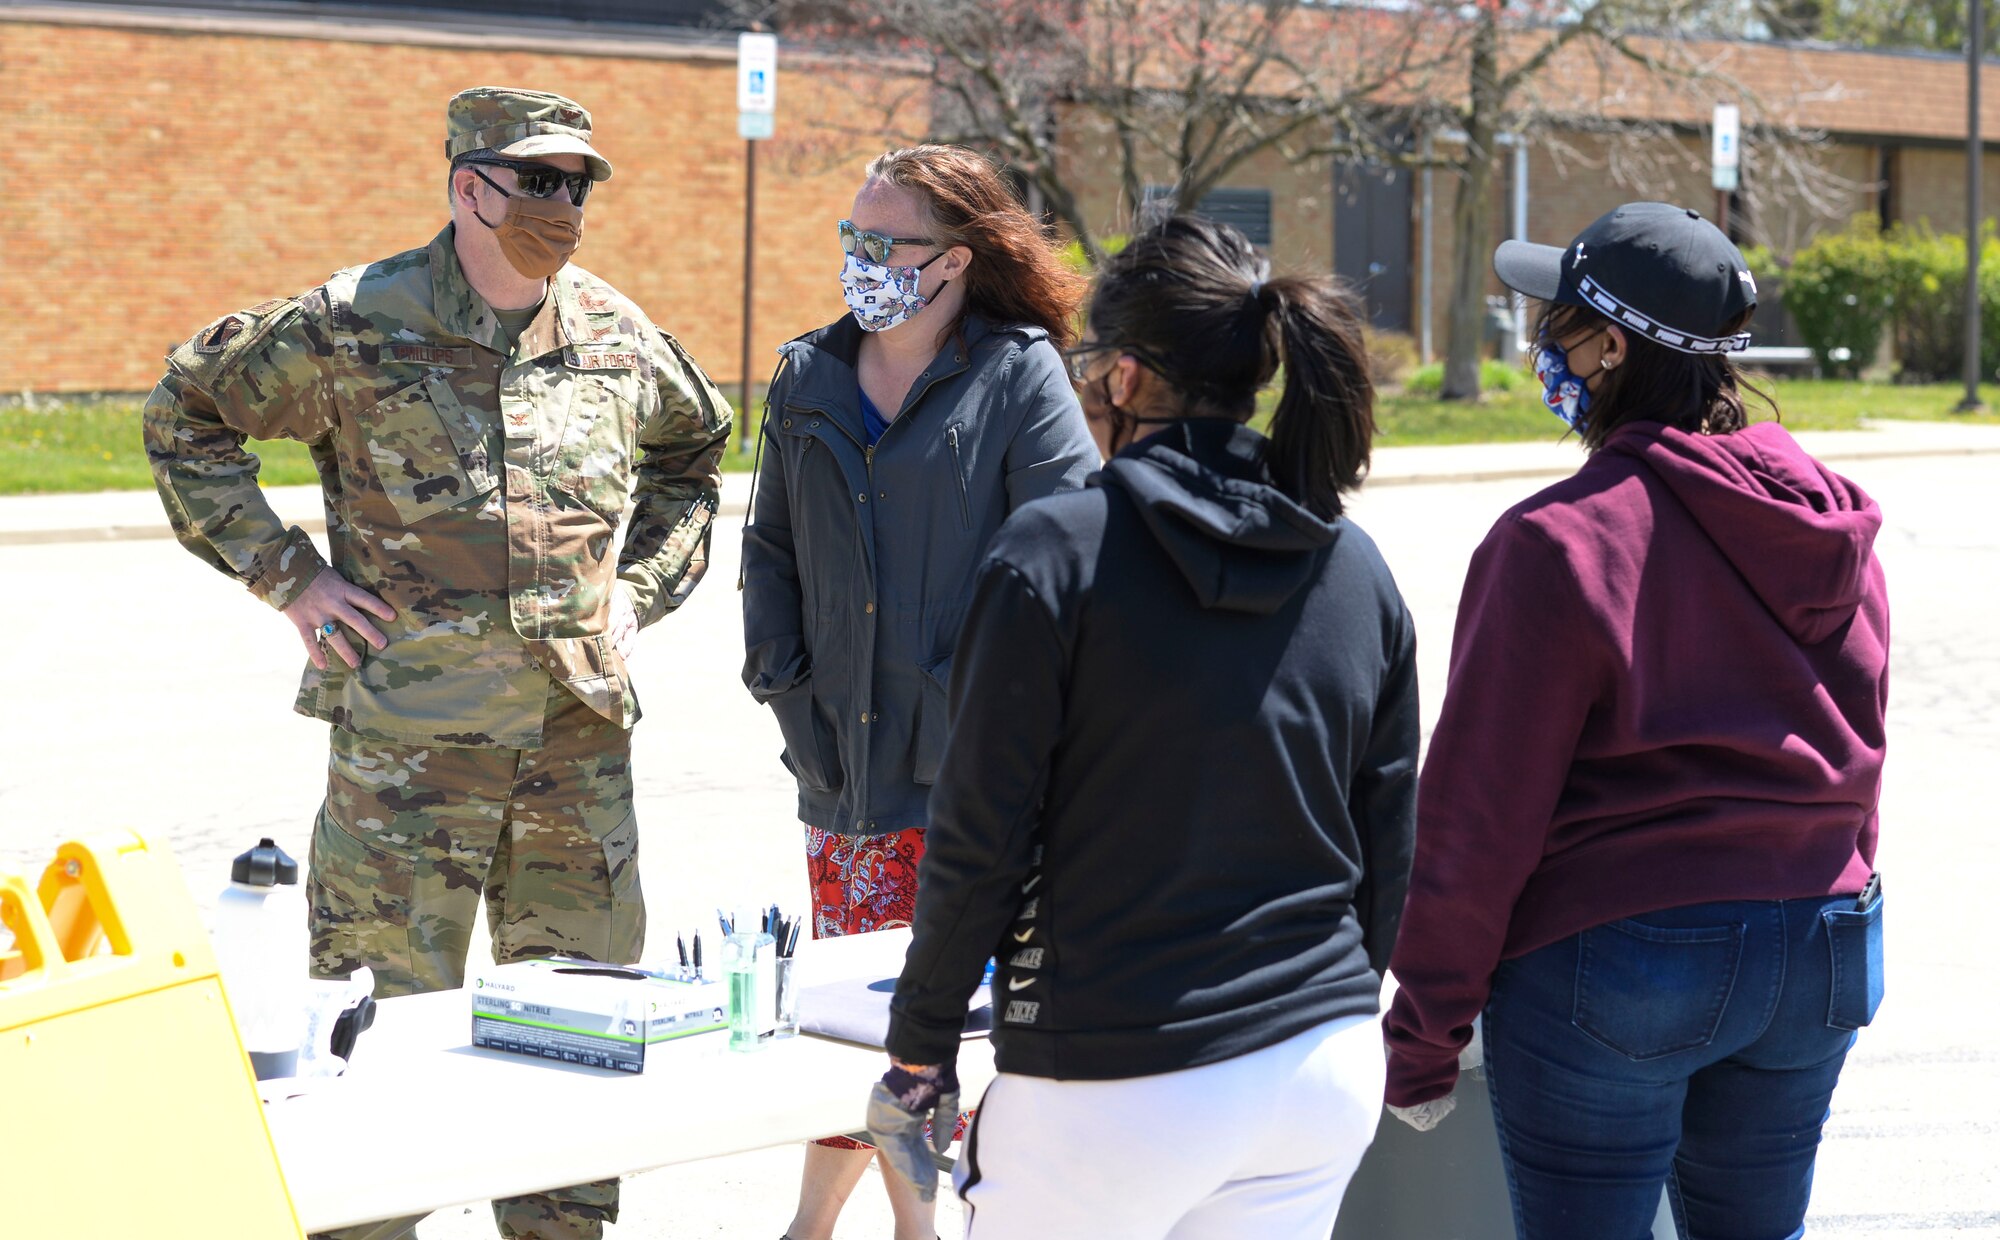 U.S. Air Force Col. Michael Phillips, 88th Air Base Wing vice commander, talks with volunteers manning a donation drop off point outside the chapel located in the Prairies housing area at Wright-Patterson Air Force Base, Ohio, April 21, 2020. (U.S. Air Force photo/Wesley Farnsworth)